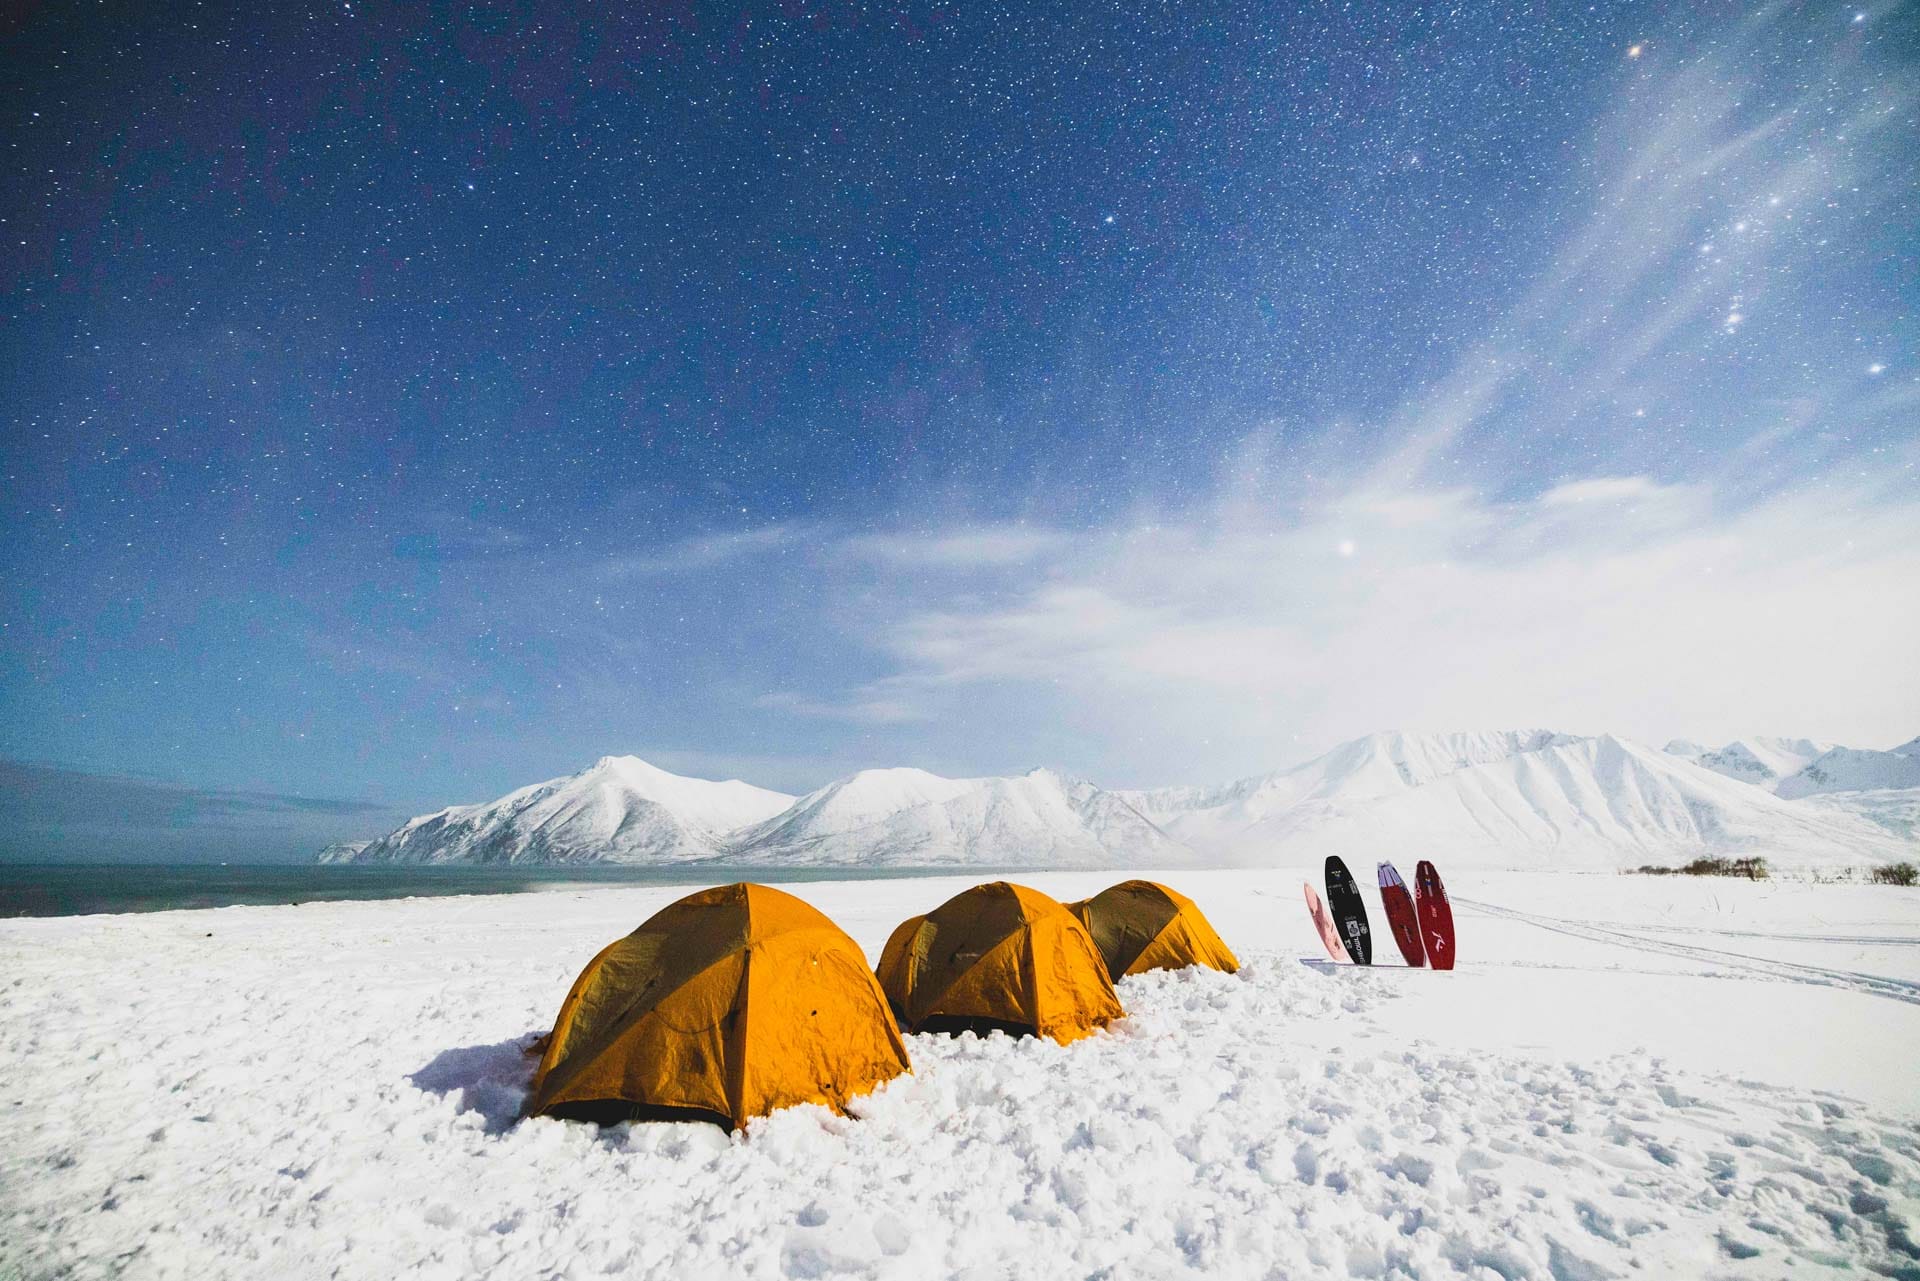 Meet the Aussie Surfers Who Travelled to Russia's Kamchatka Peninsula in Search of Unridden Waves, Tim Ashelford, tents, snow, clear